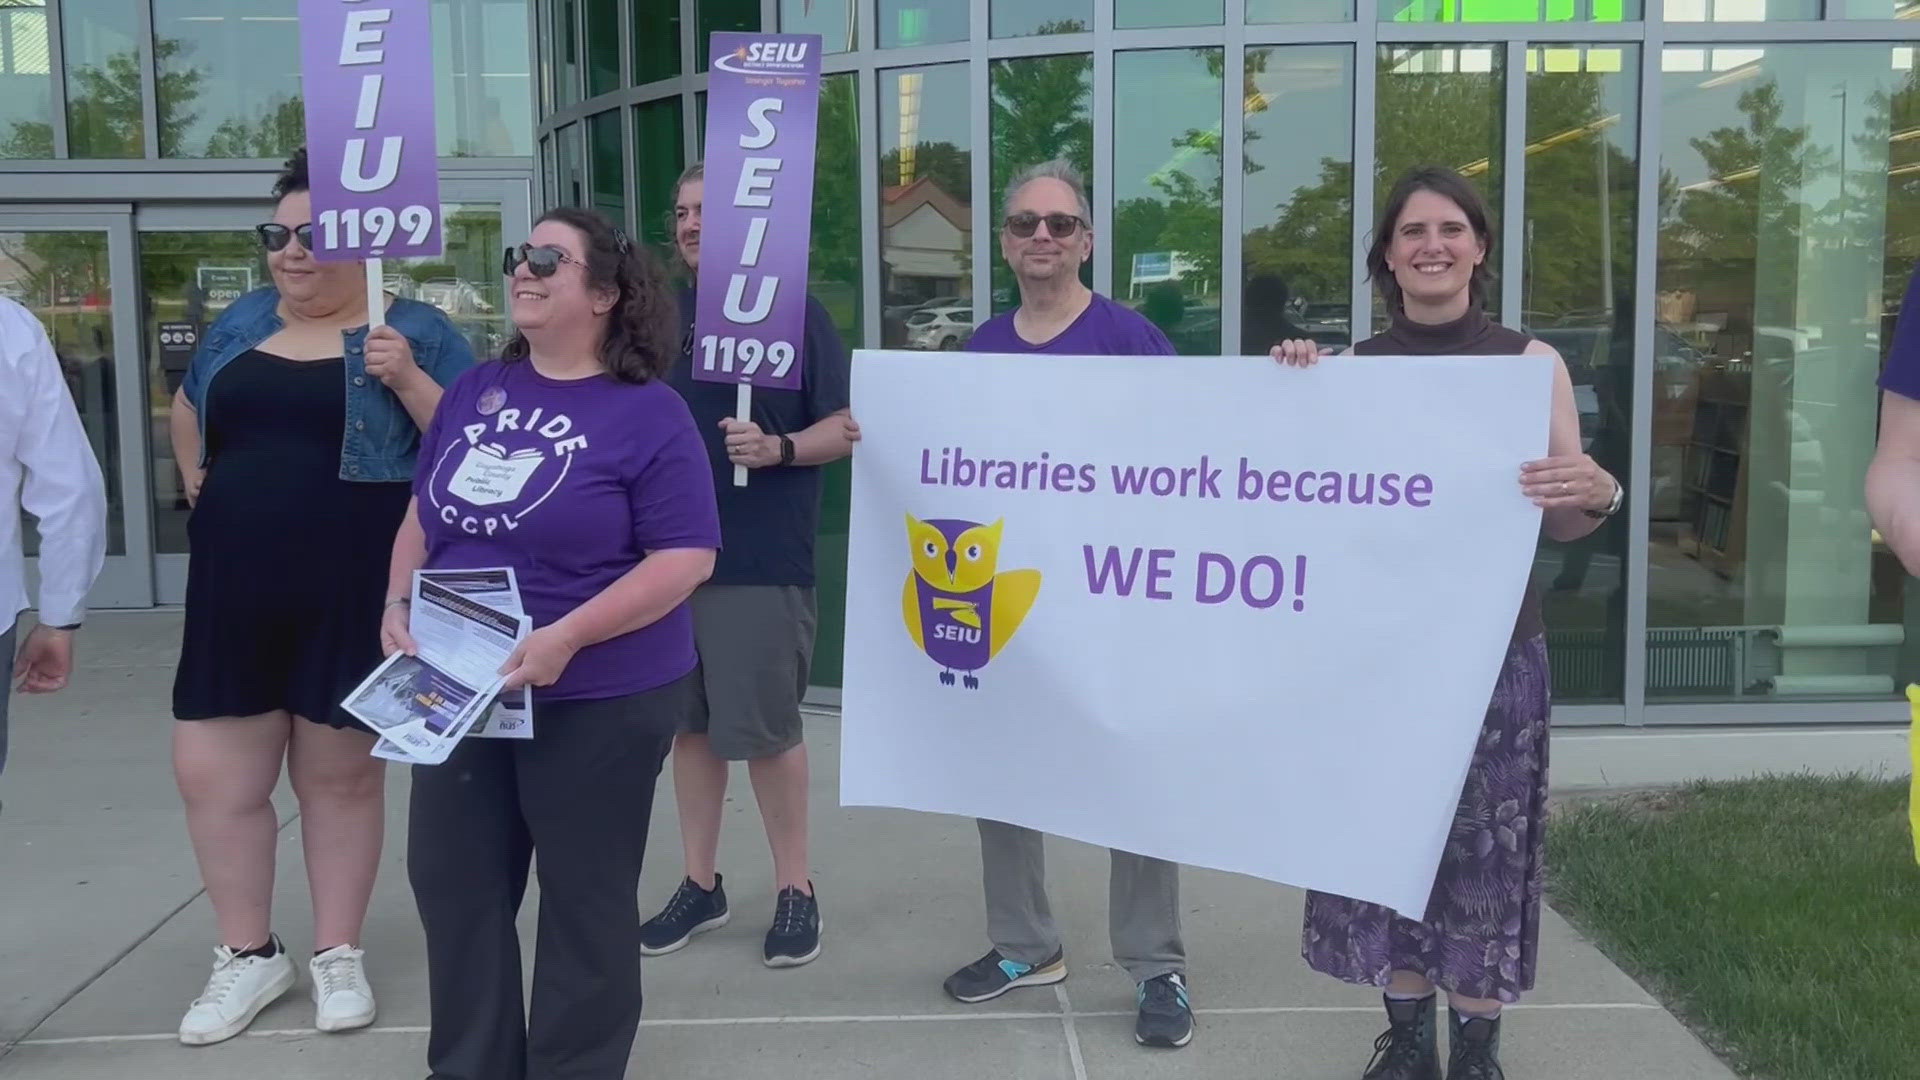 Members of SEIU 1199 'overwhelmingly' authorized a potential strike, claiming they have seen 'no growth in their wages' over the past 15 years.